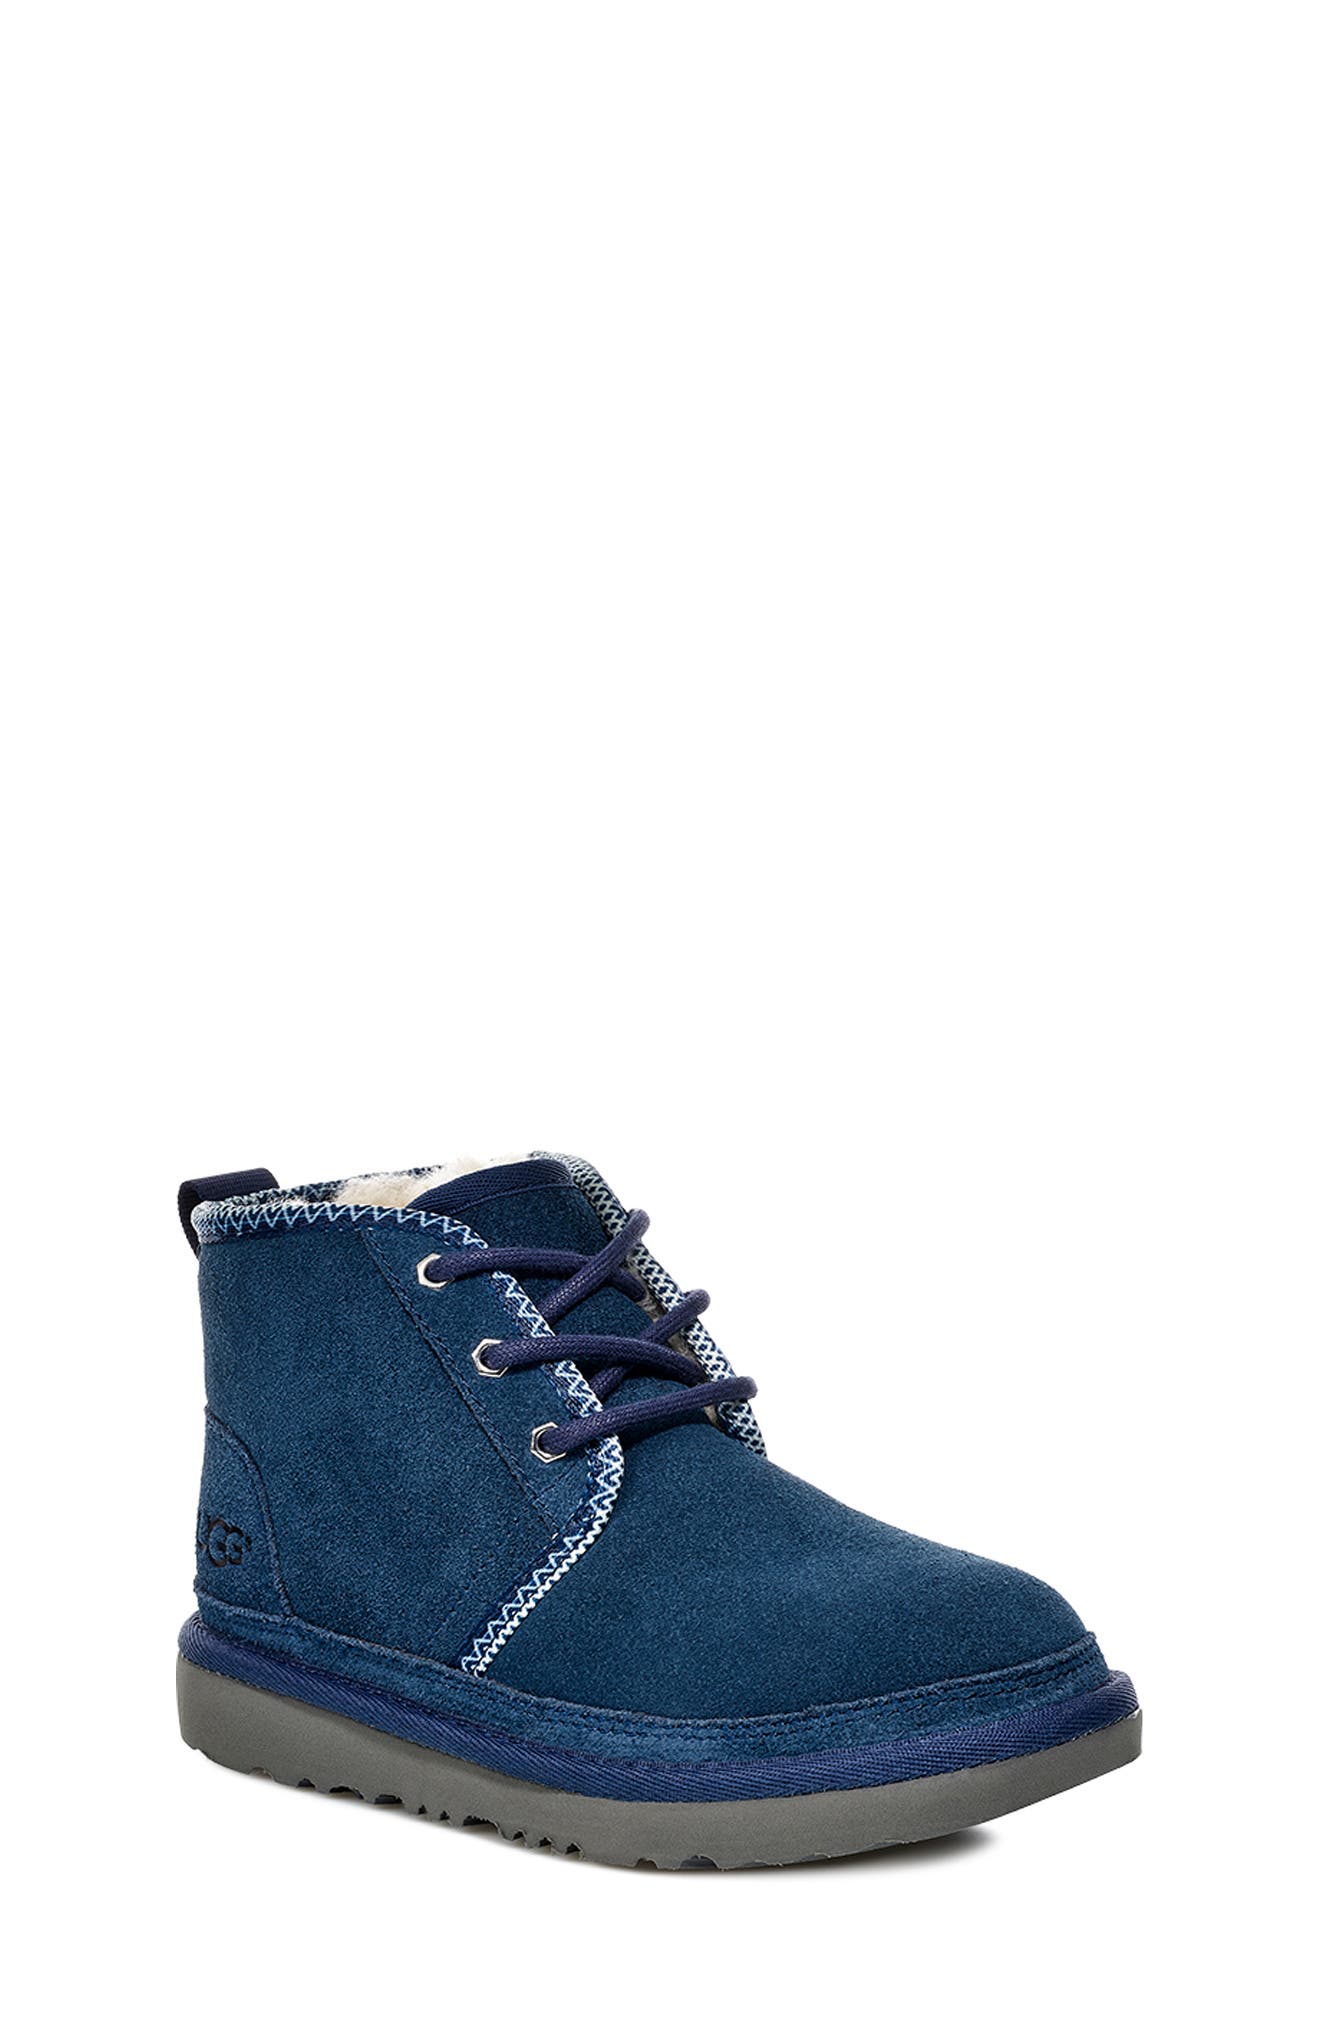 blue and white neumel uggs